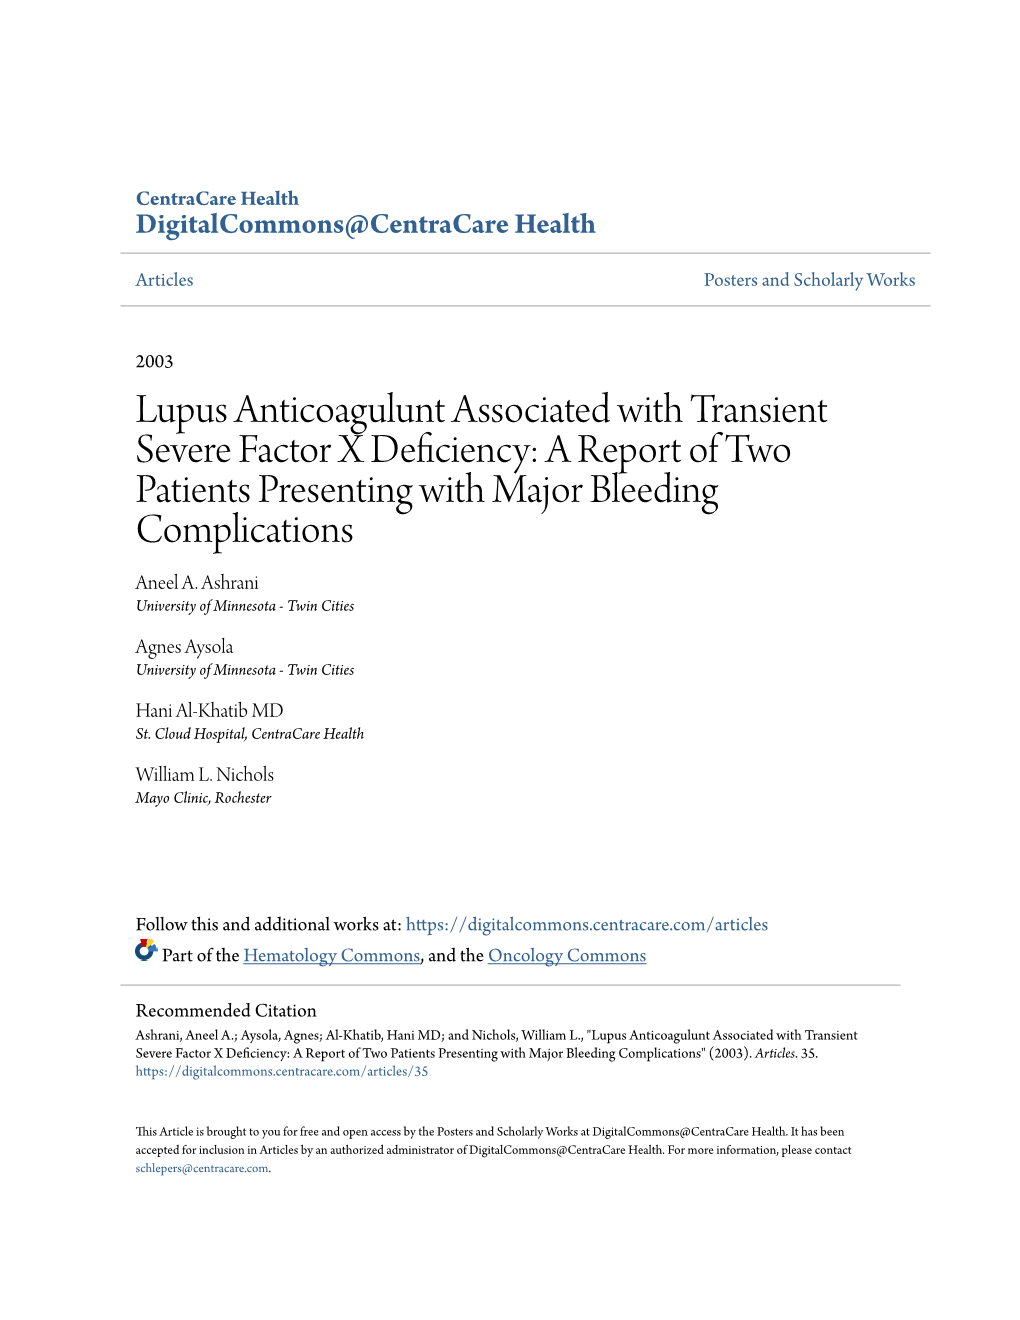 Lupus Anticoagulant Associated with Transient Severe Factor X Deficiency